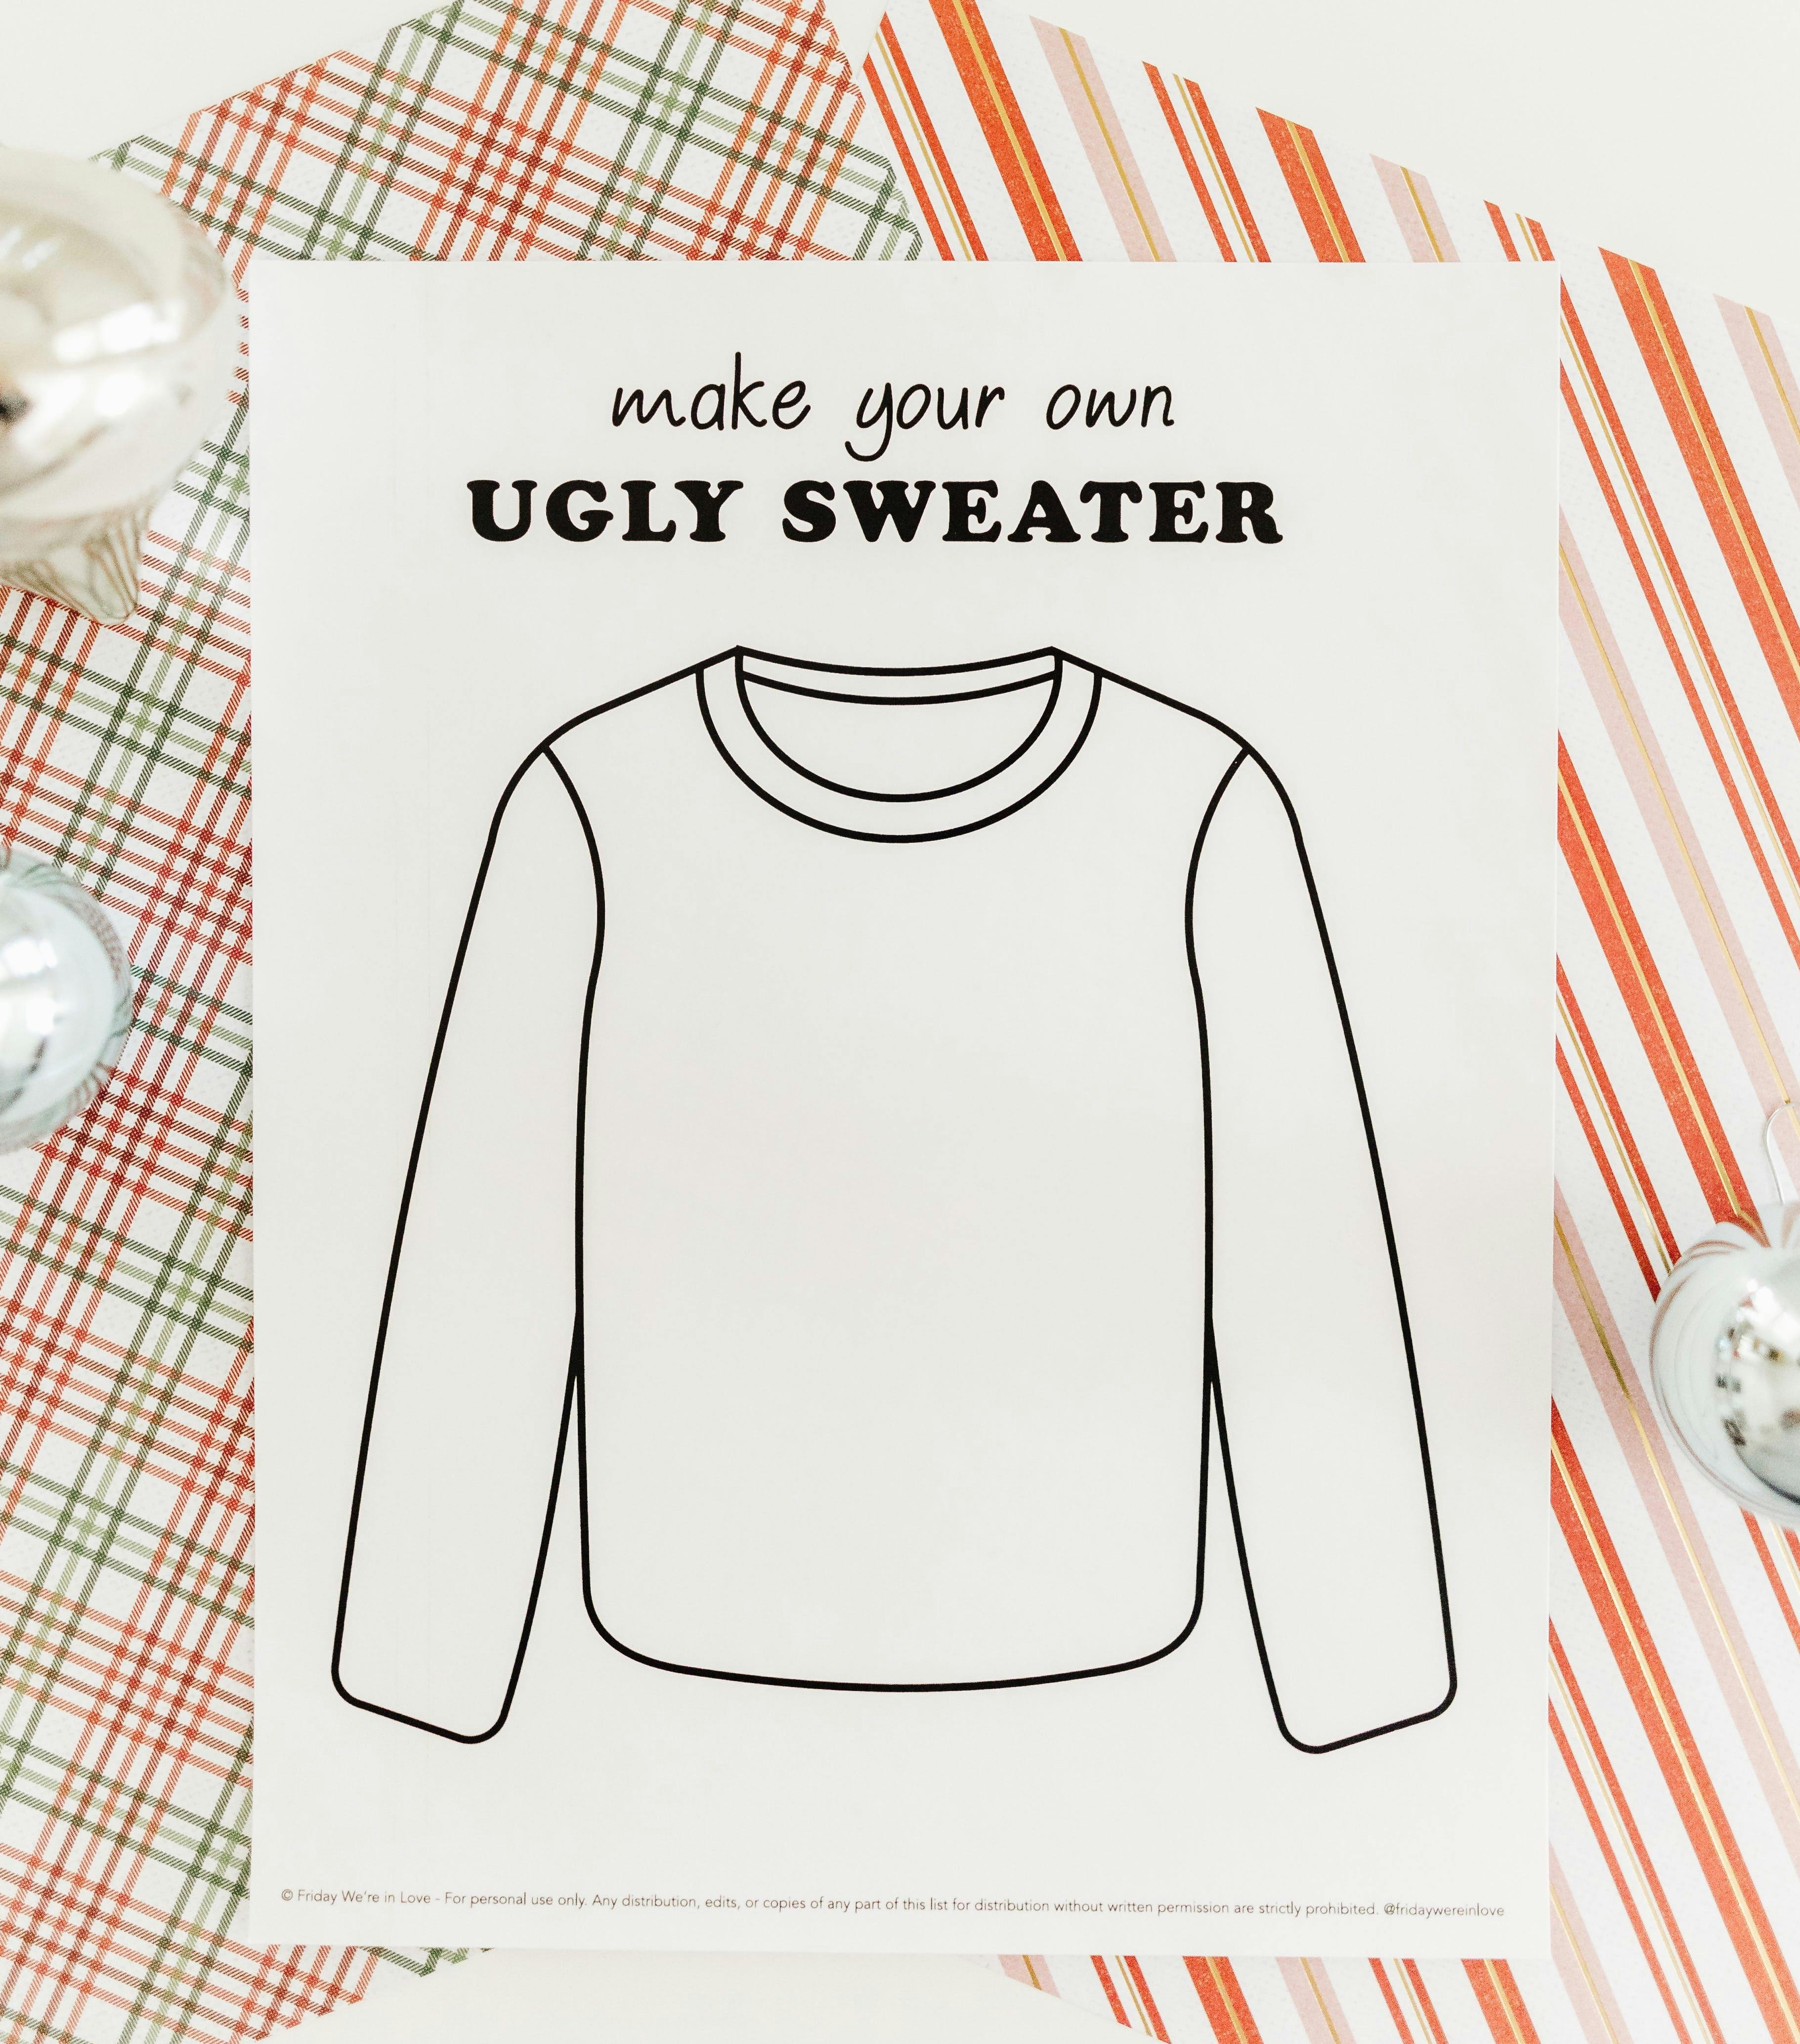 Ugly sweater template free printable with craft supplies. 